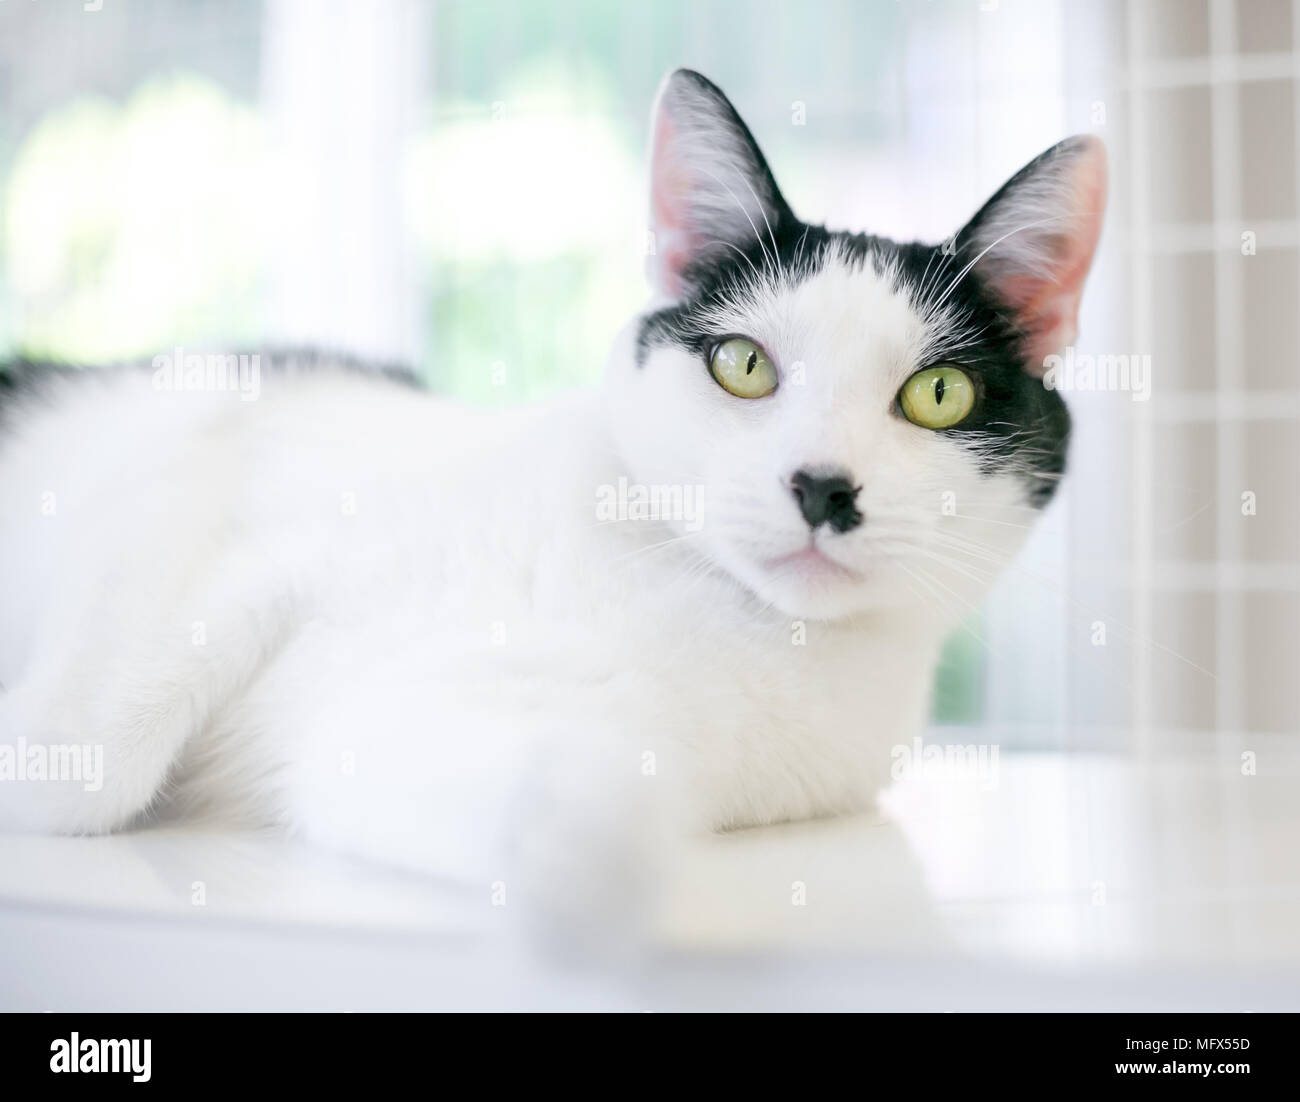 A black and white domestic shorthair cat lounging Stock Photo